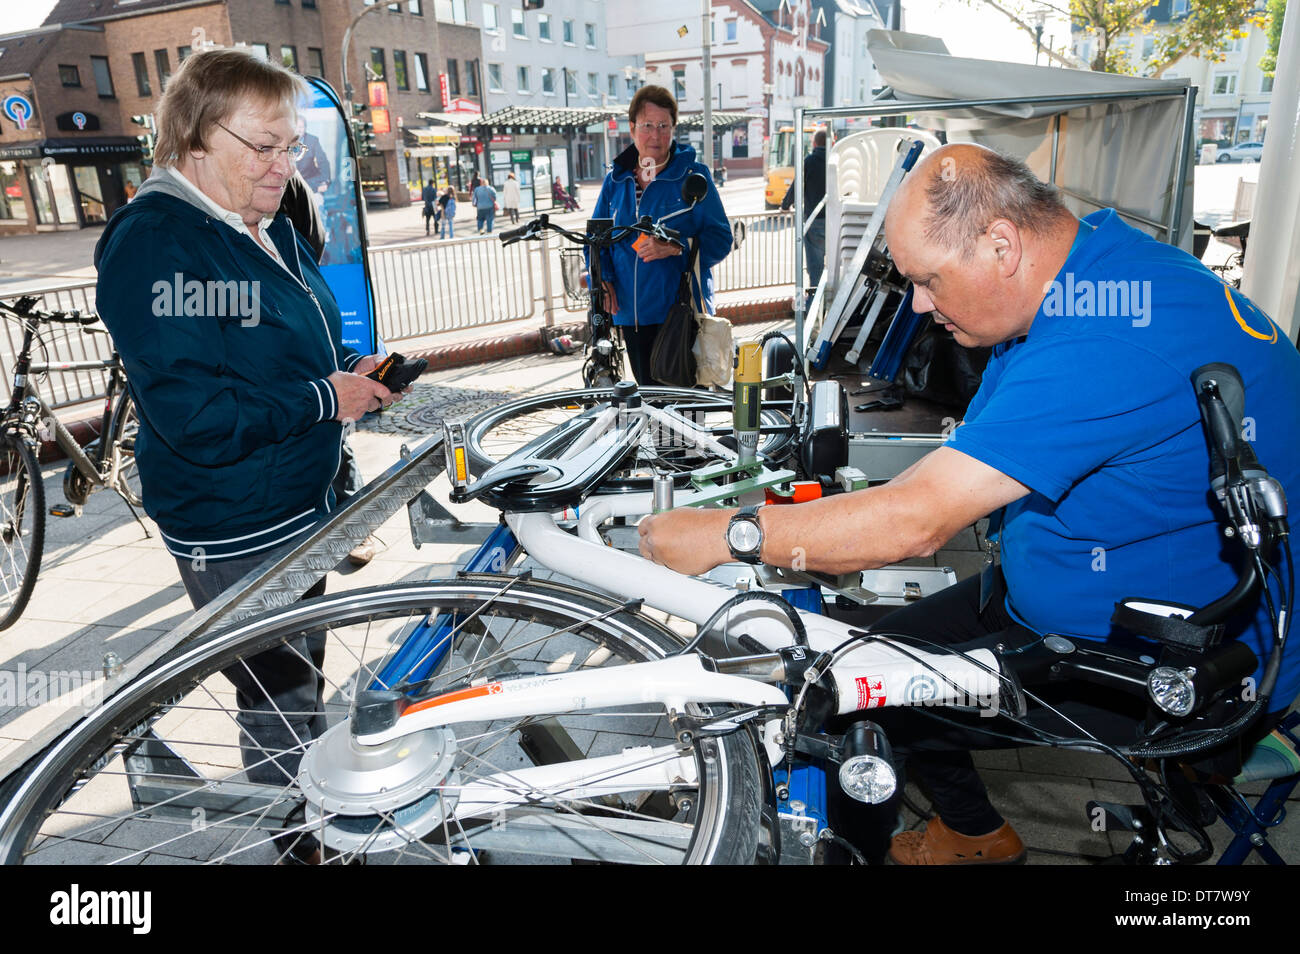 A technician of the ADFC bikers club, on the right, encodes a bike. Stock Photo